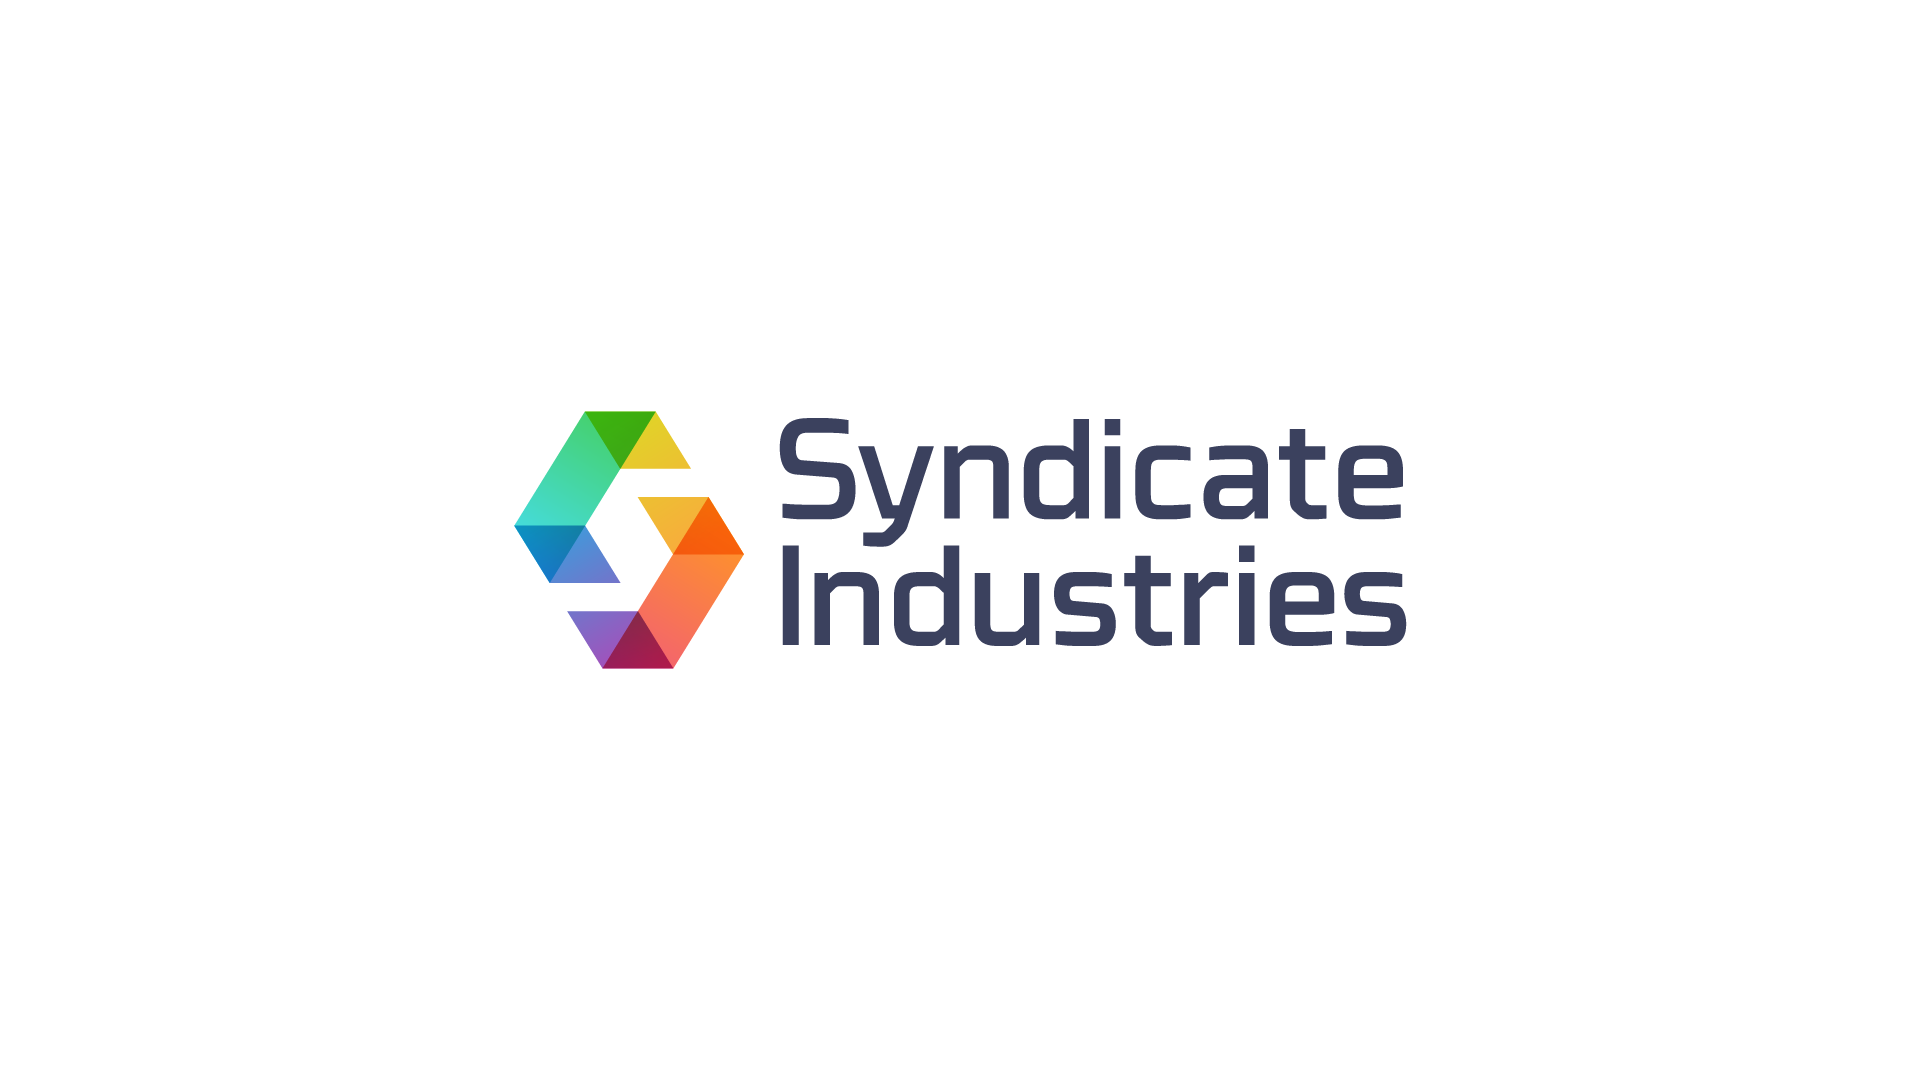 Syndicate Solutions - Security Solutions logo, abstract colorful 'S' design, symbolizing security and dynamic solutions